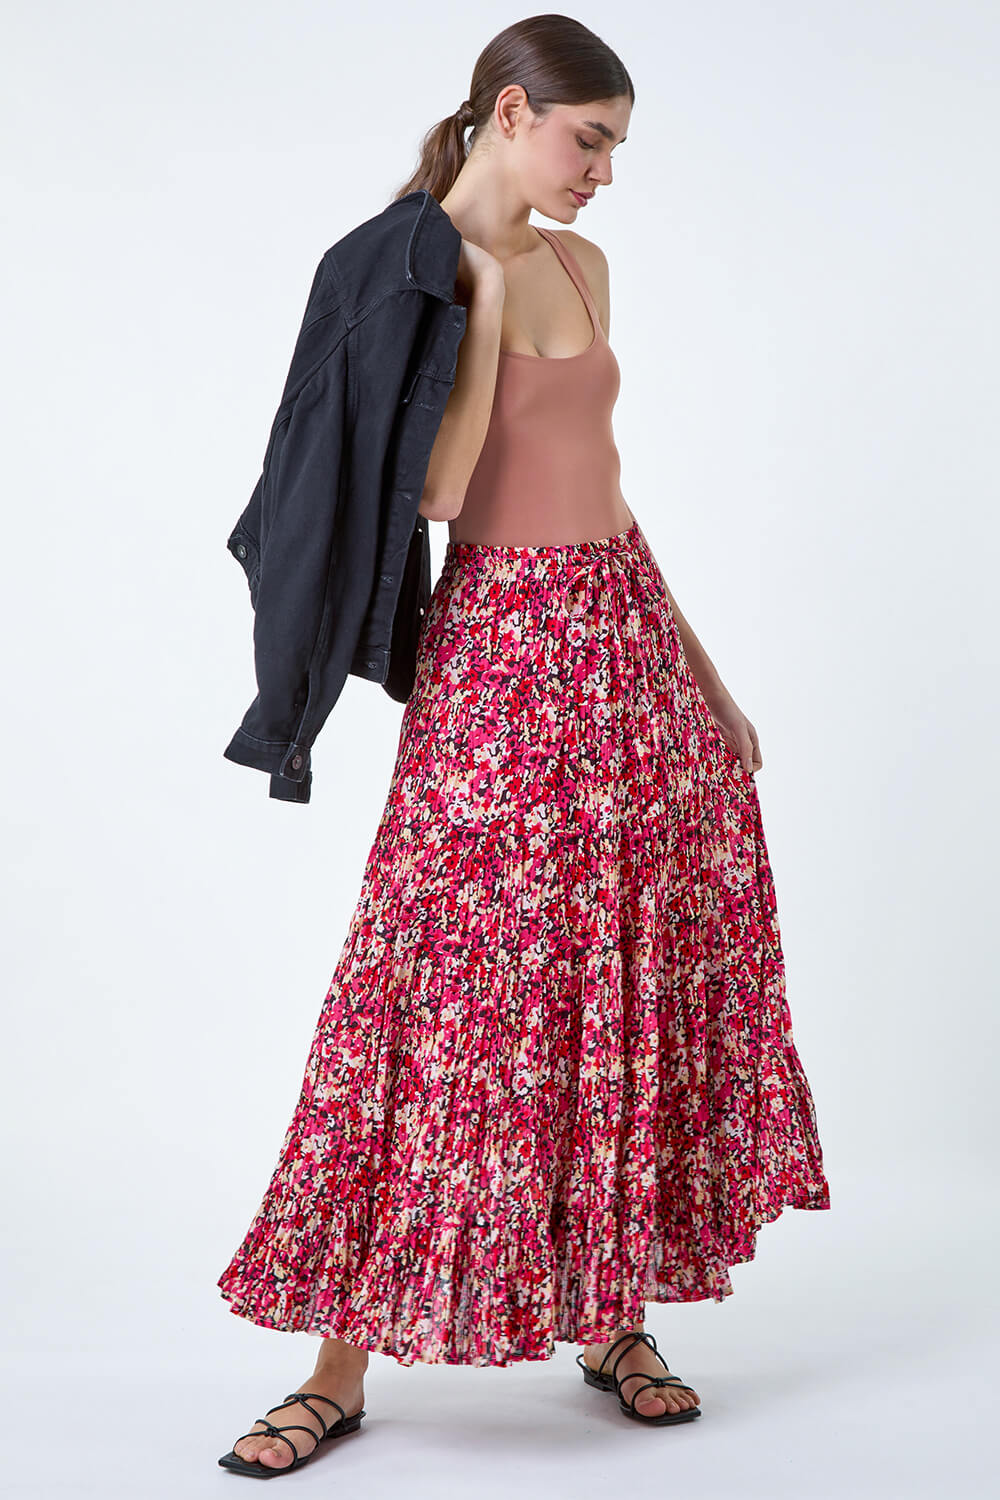 PINK Floral Crinkle Cotton Tiered Maxi Skirt, Image 2 of 5